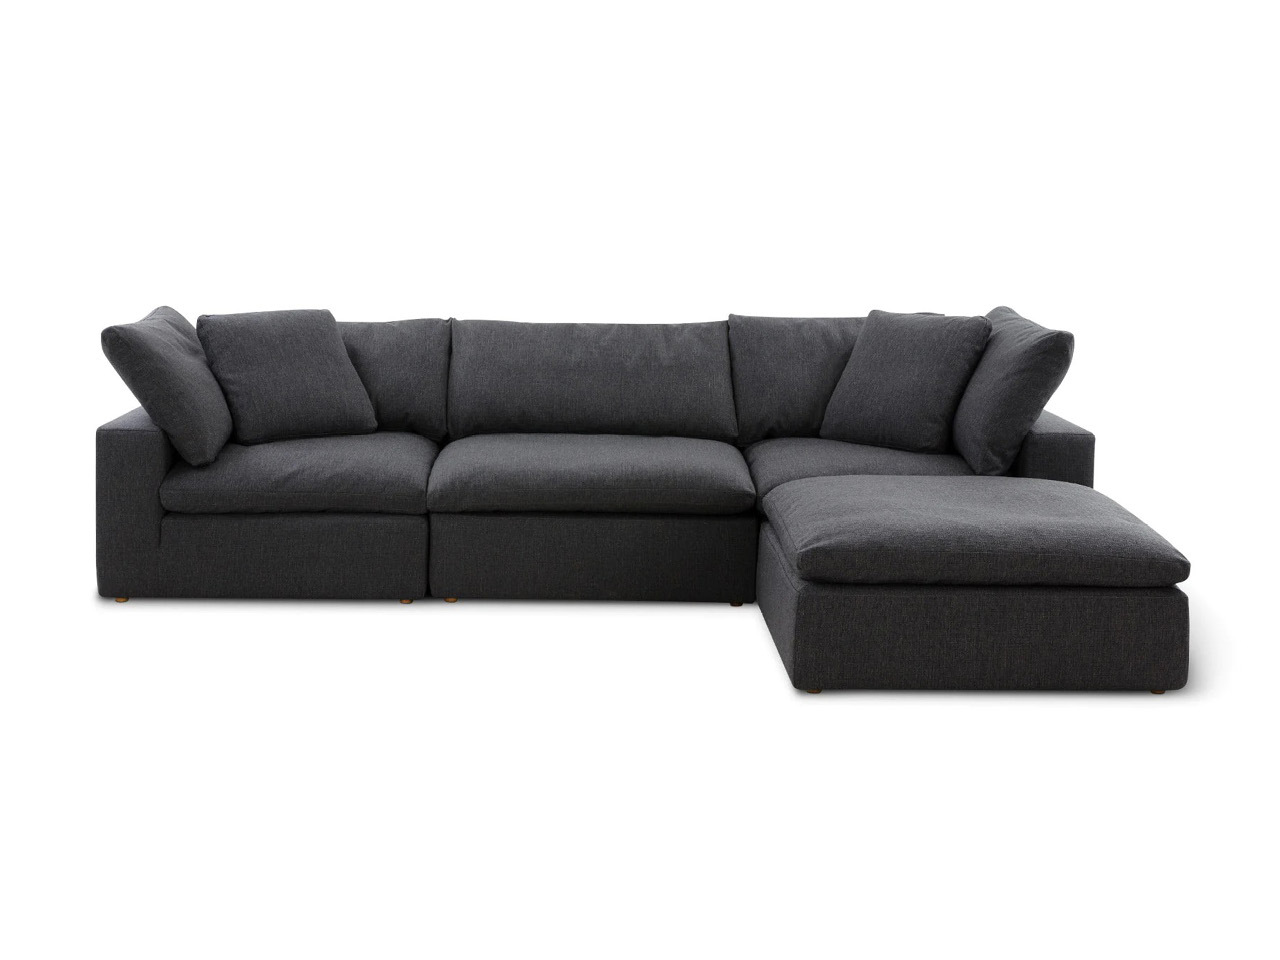 A grey sectional Sundays couch that is on sale during the best Black Friday Sales.